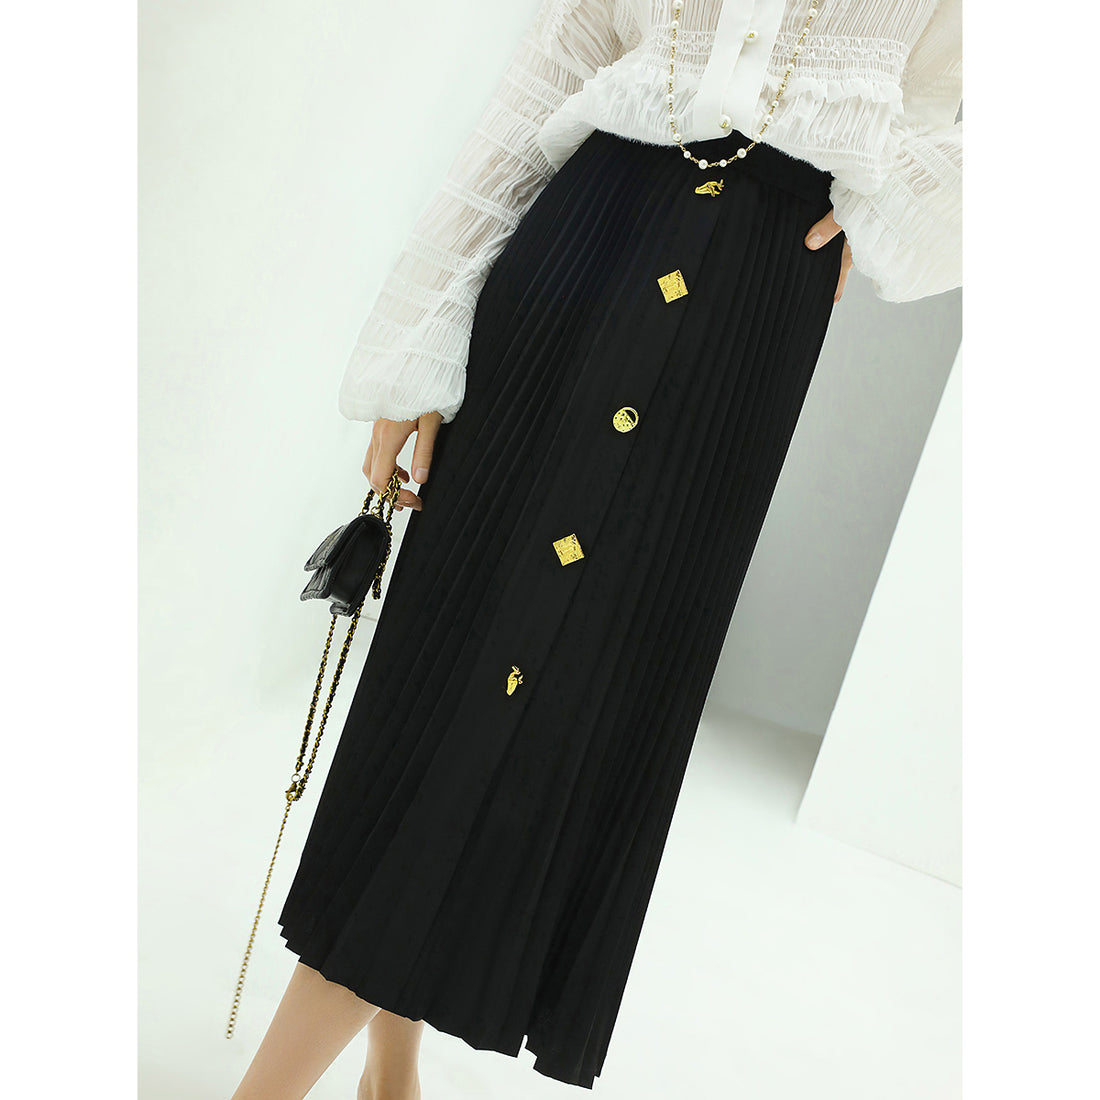 black-pleated-skirt-with-gold-metal-buttons_all_black_1.jpg